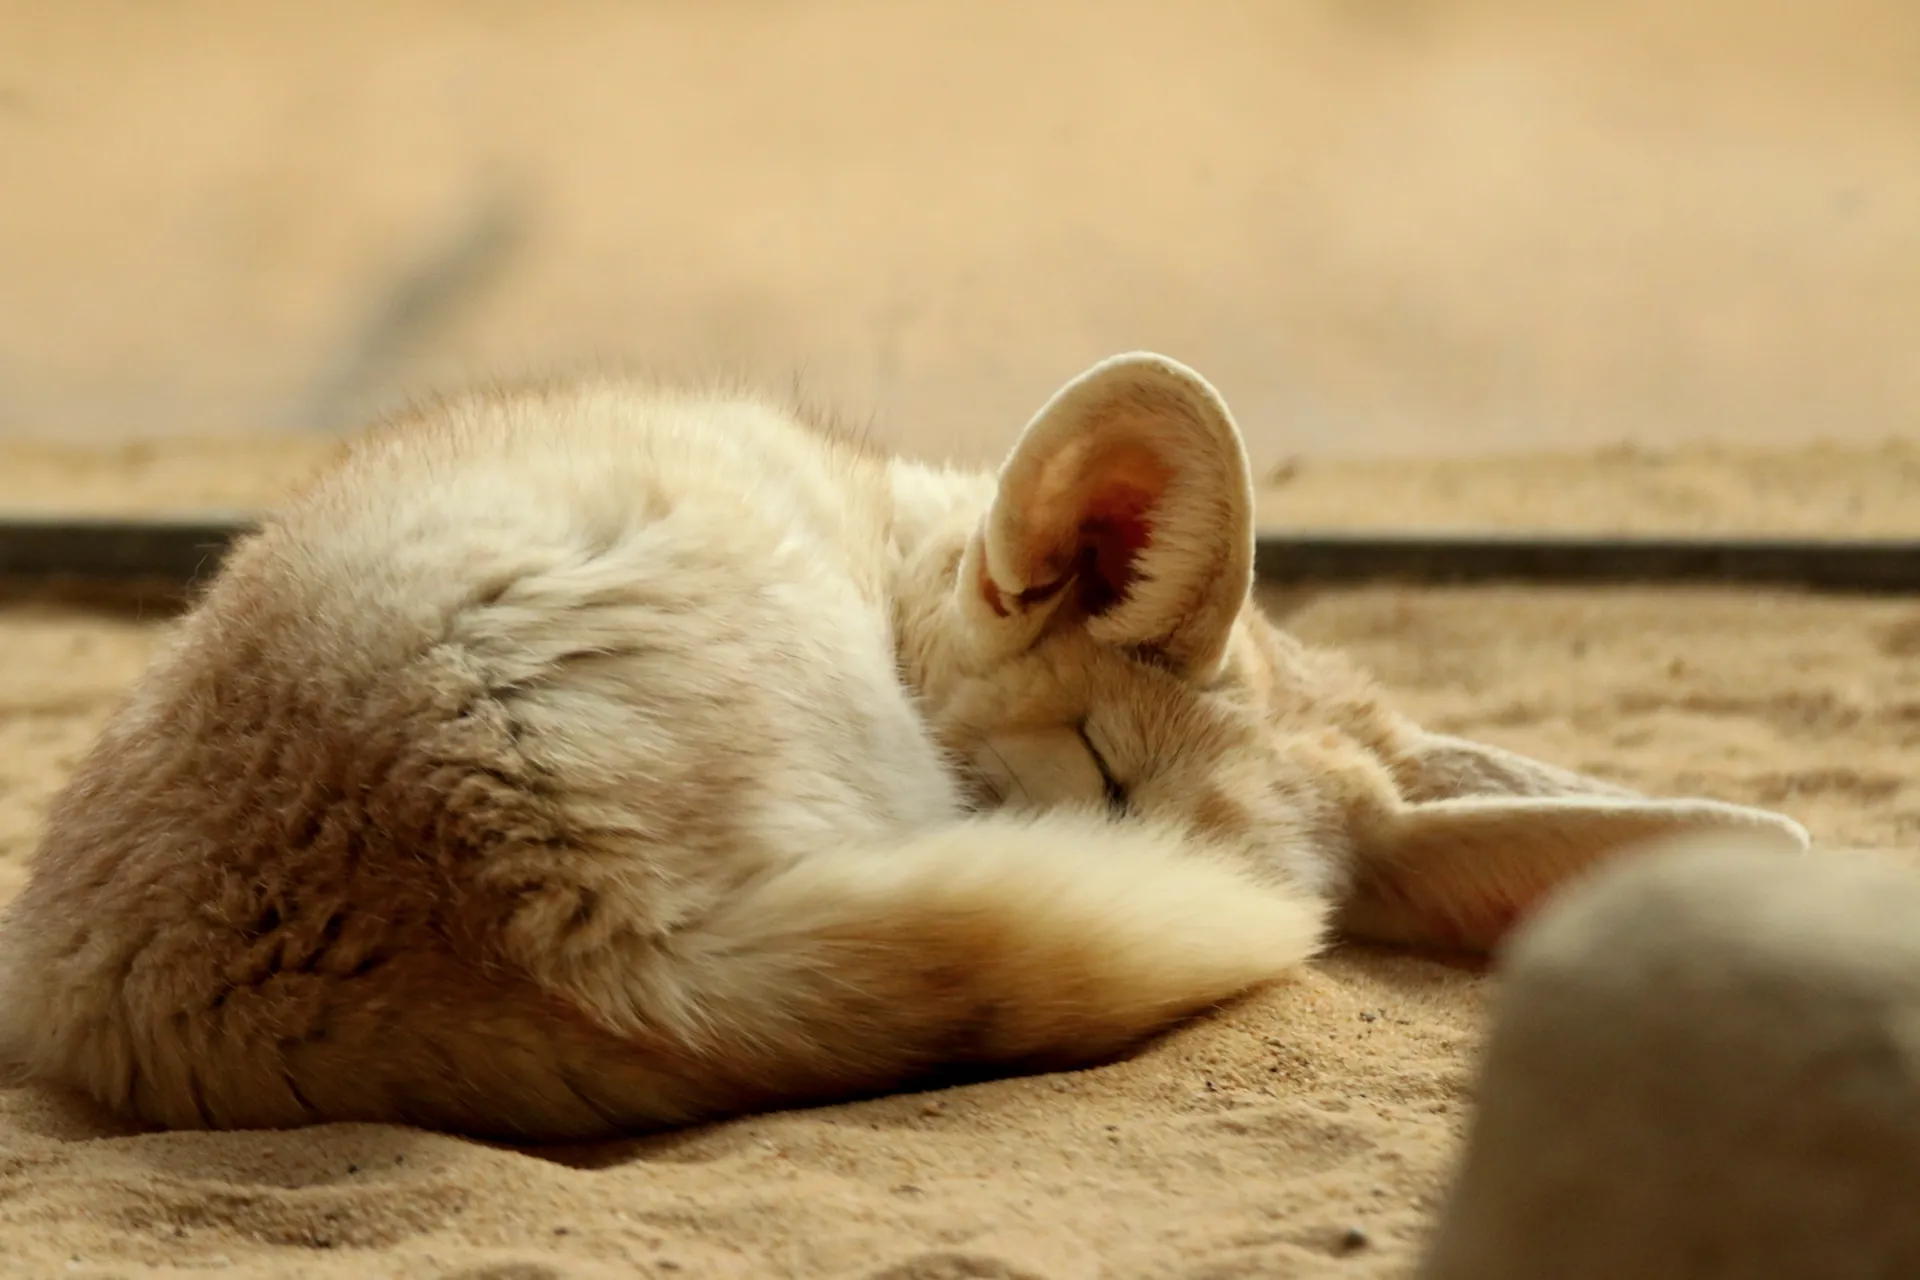 Another very sleepy looking fennec fox in croissant shape. Or maybe it's a donut already. Definitely close.